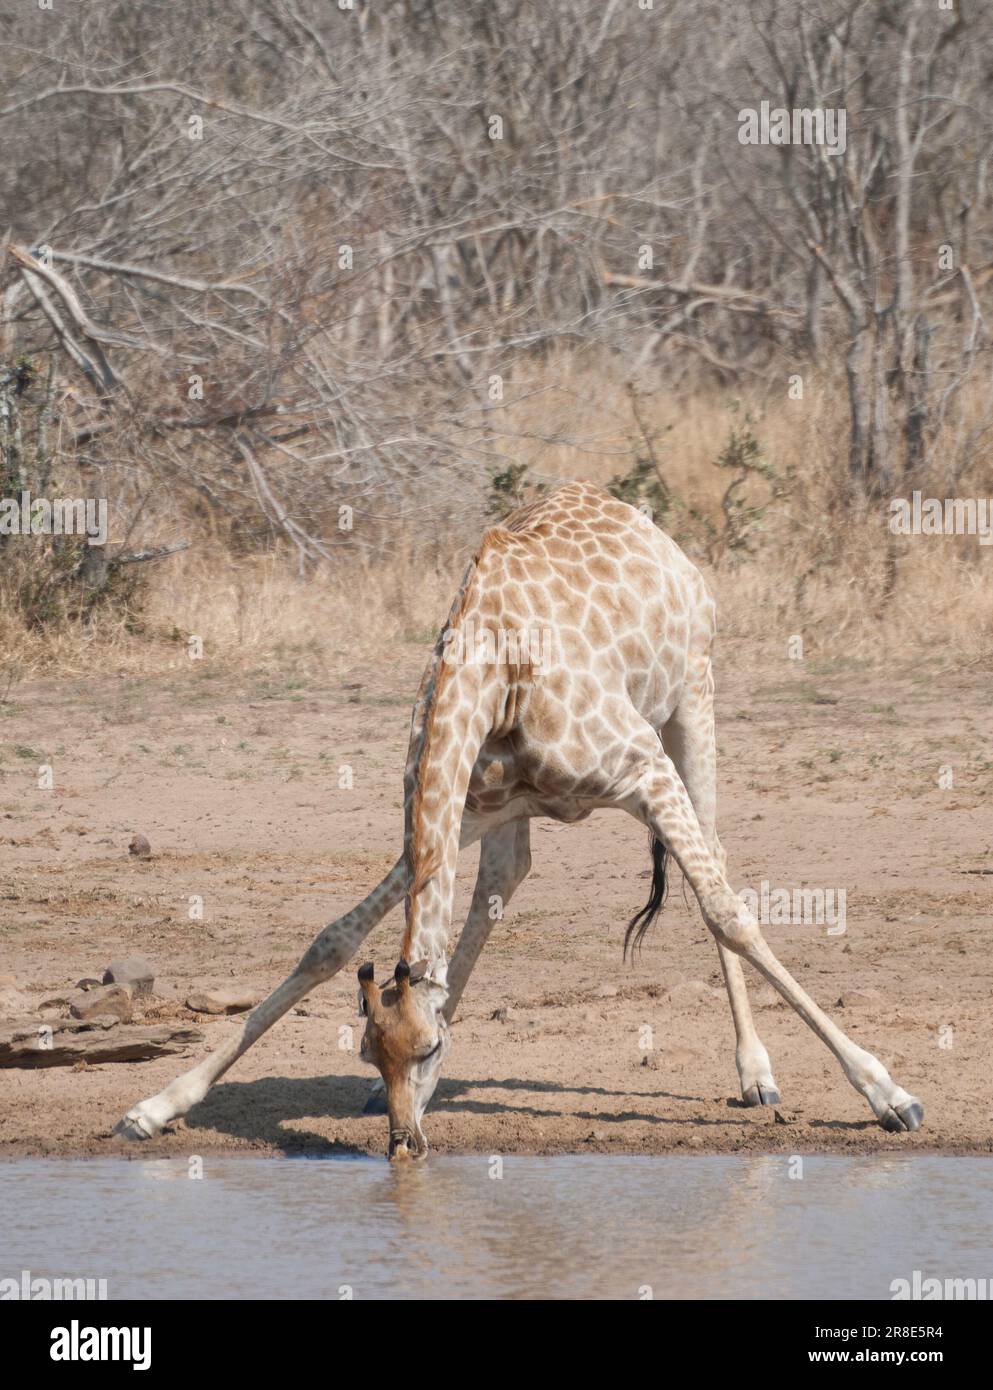 Giraffe doing the splits to get a drink of water, Kruger National Park Stock Photo